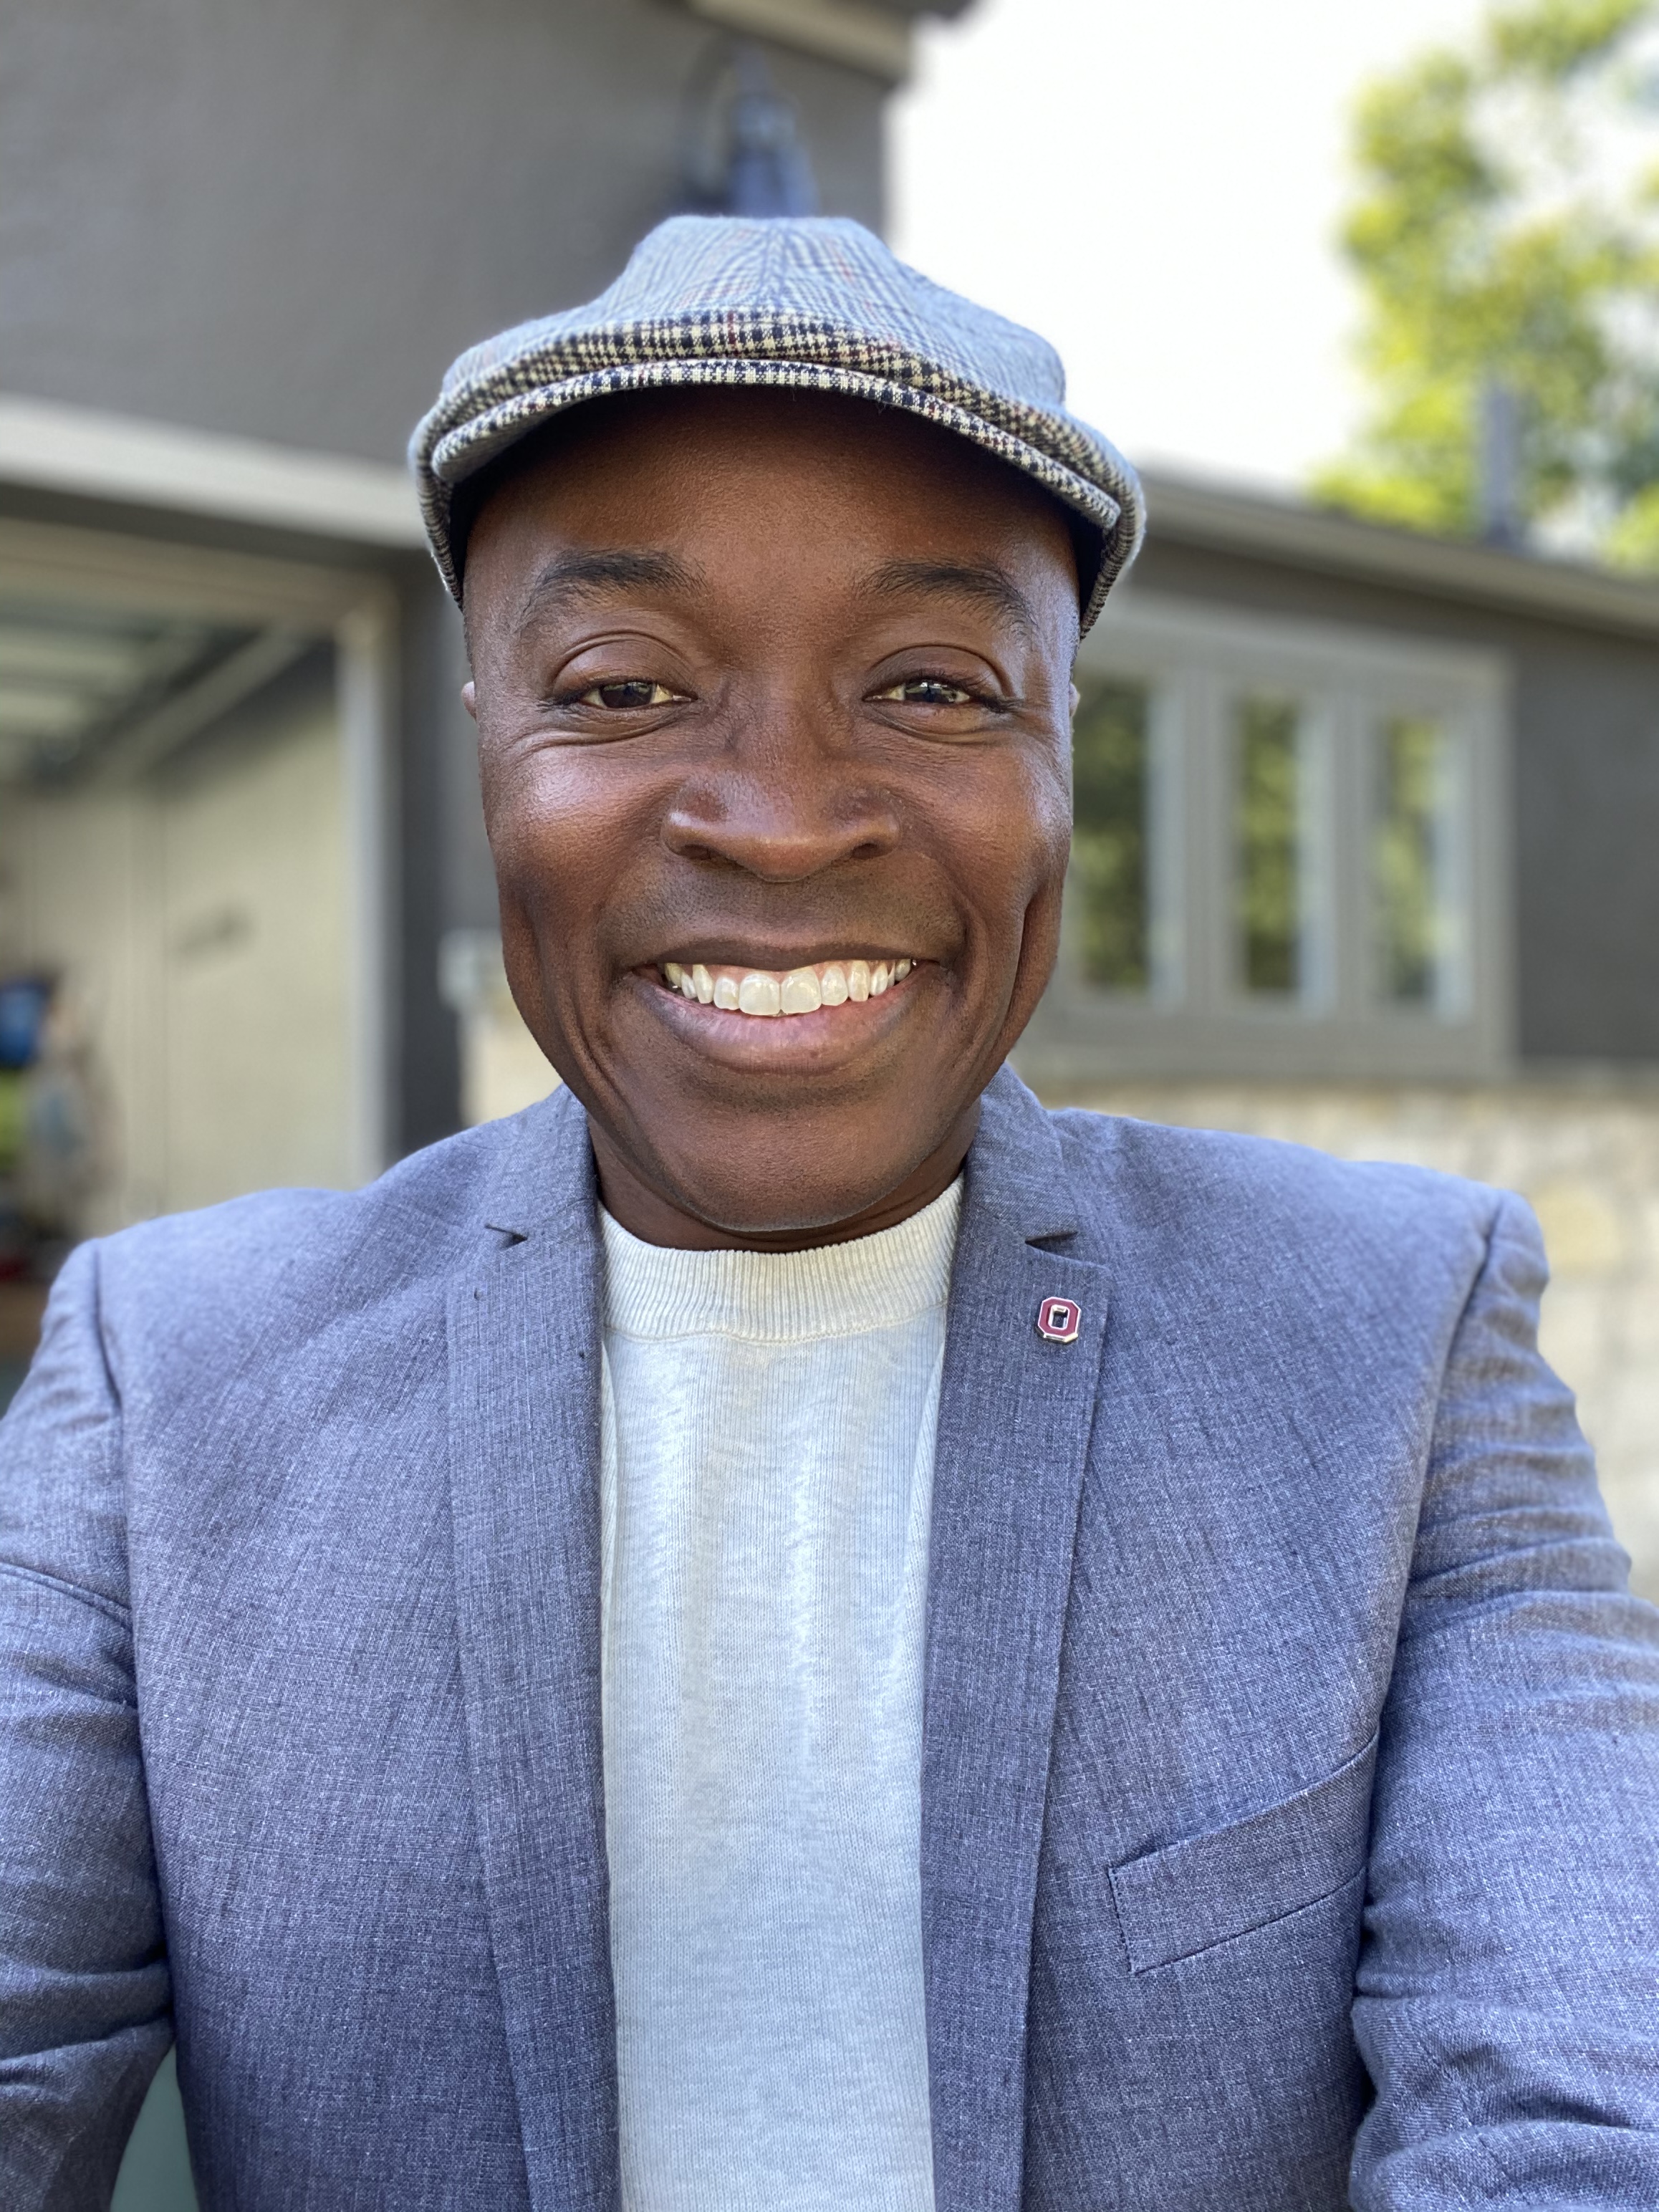 head and shoulders portrait photo of smiling African American man wearing a gray hat and blazer